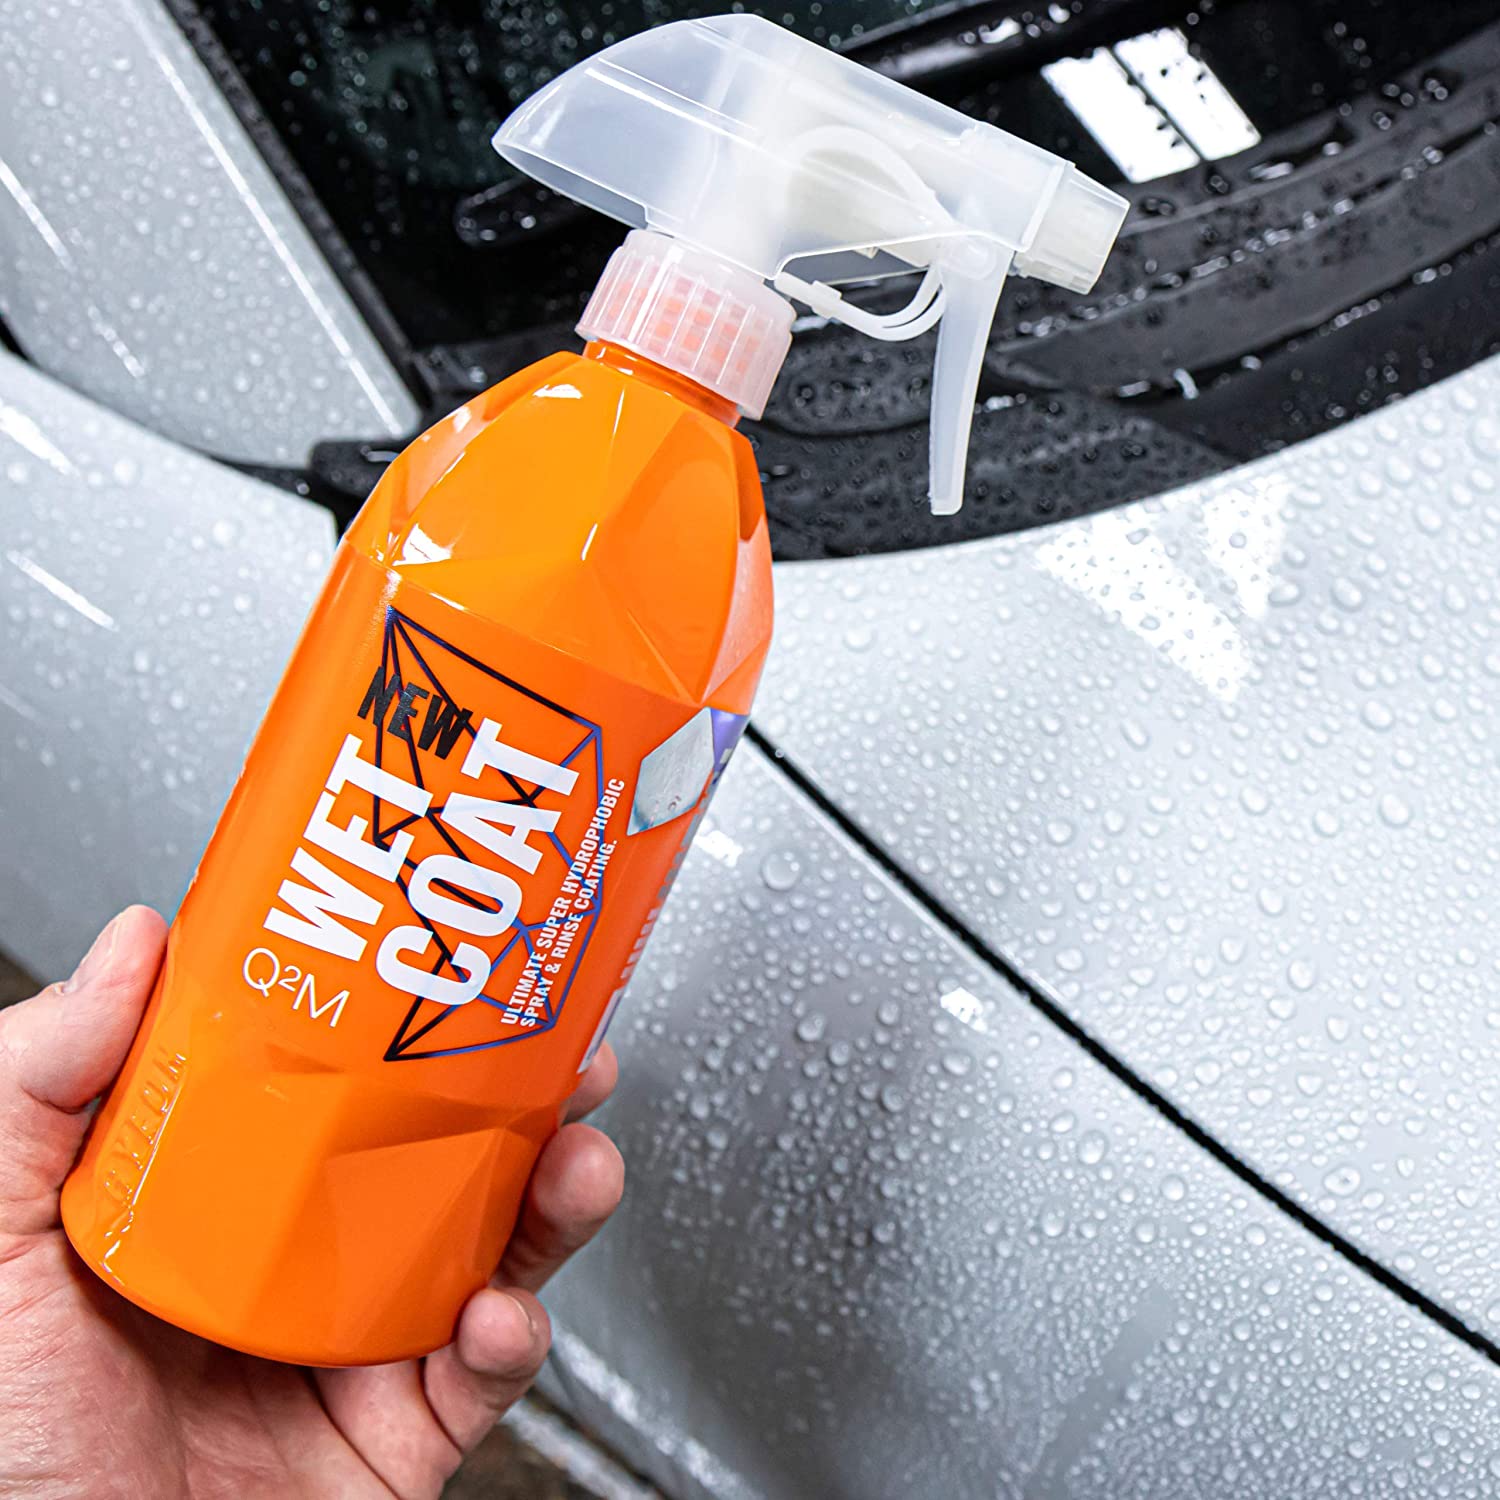 Whether your vehicle is coated or uncoated, Gyeon wet coat is the perfect  post wash maintenance product to keep your vehicle looking fresh between  washes. Maintenance is key! #rdvaletingdetailing #bmw #m5 #maintenanceclean  #